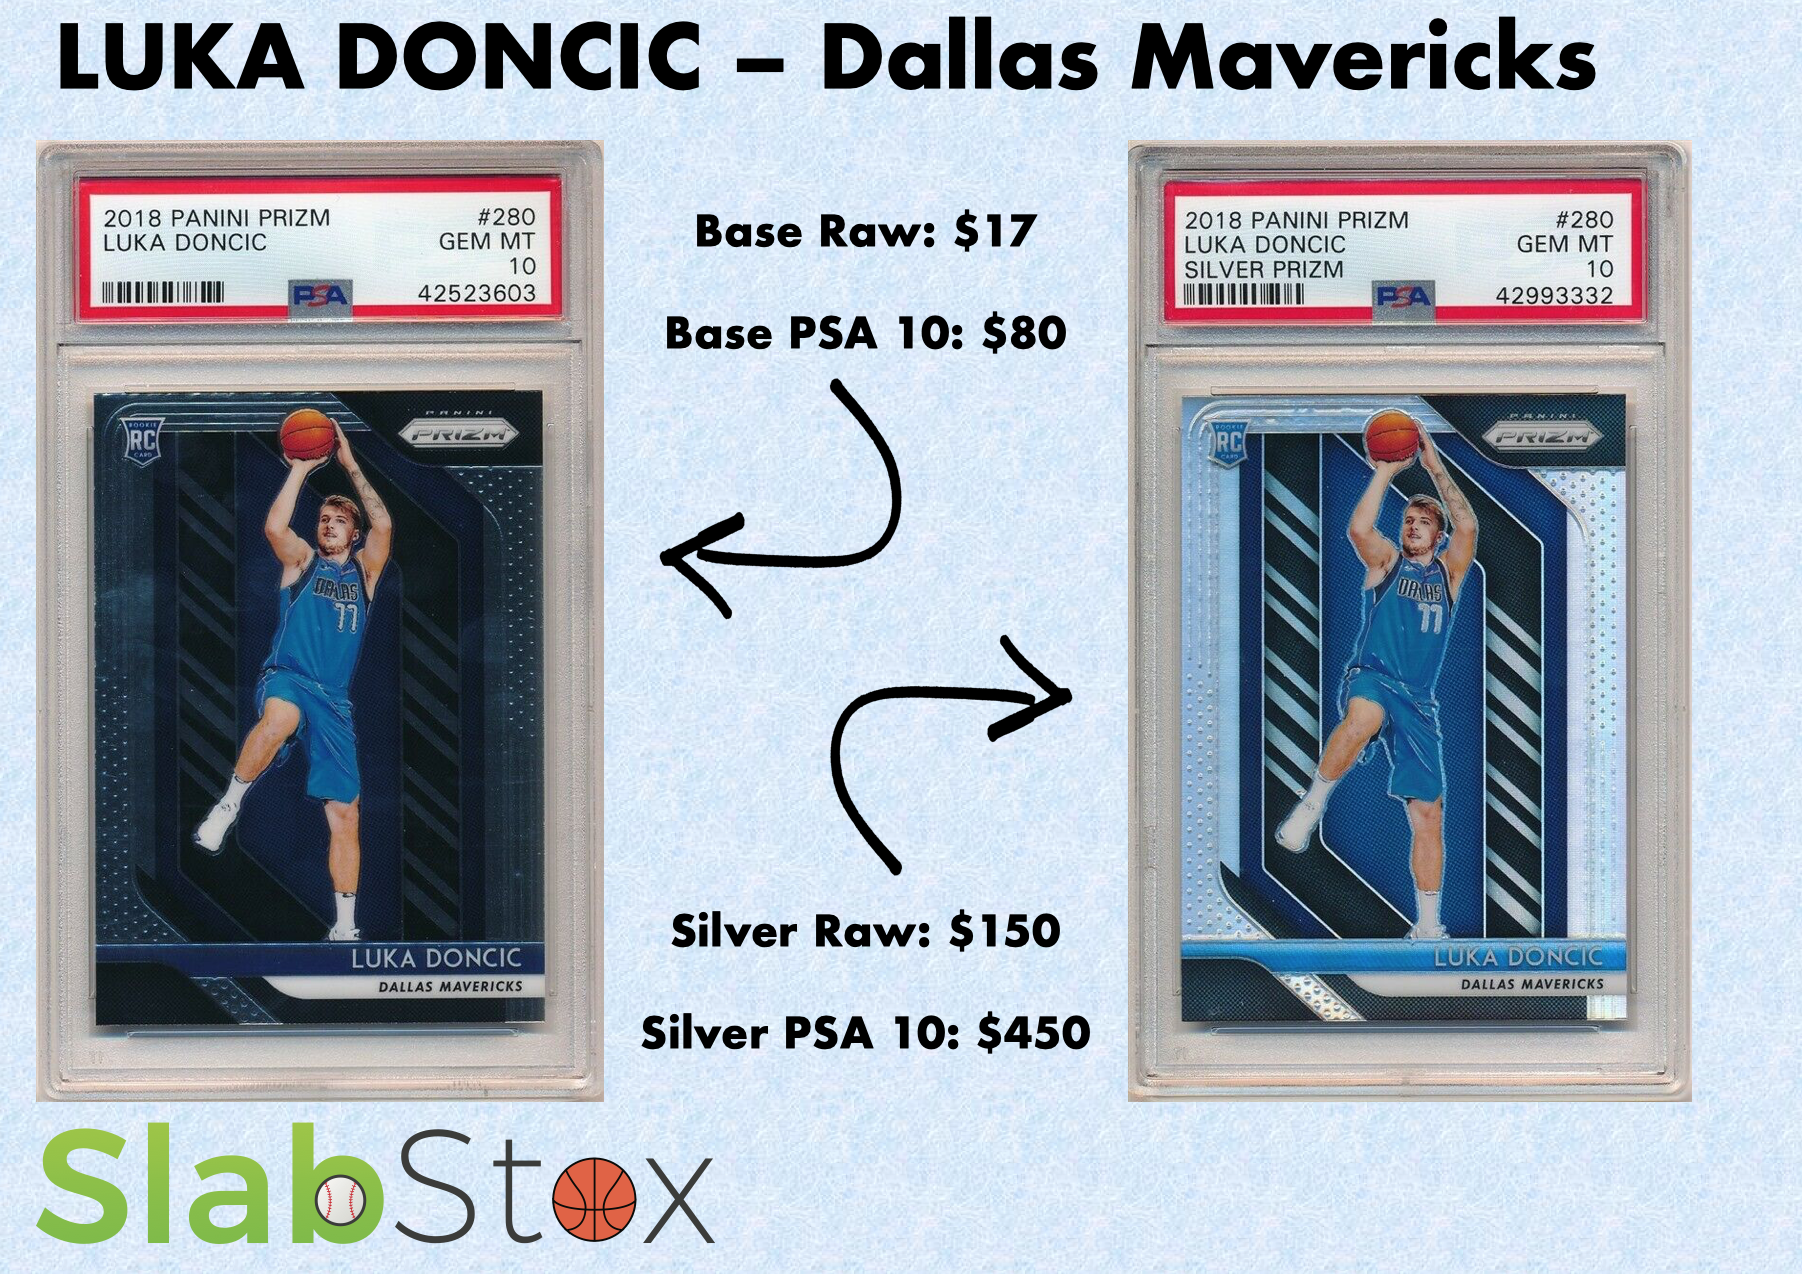 Graphic that displays two different sports cards of Luka Doncic, Dallas Mavericks